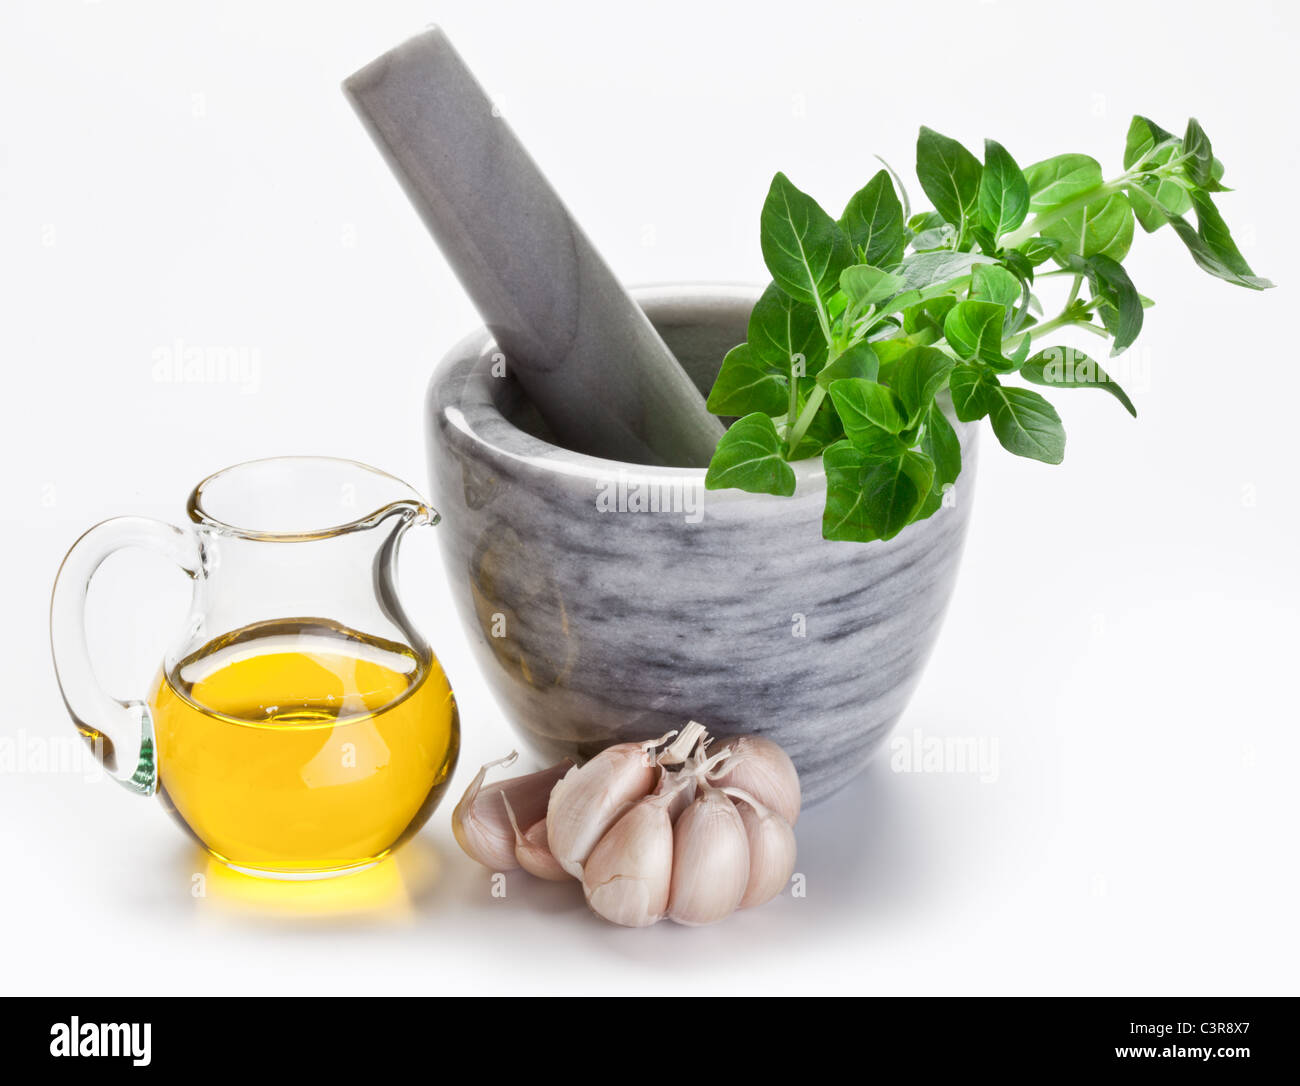 Mortar with pestle and basil herbs and olive oil. Stock Photo